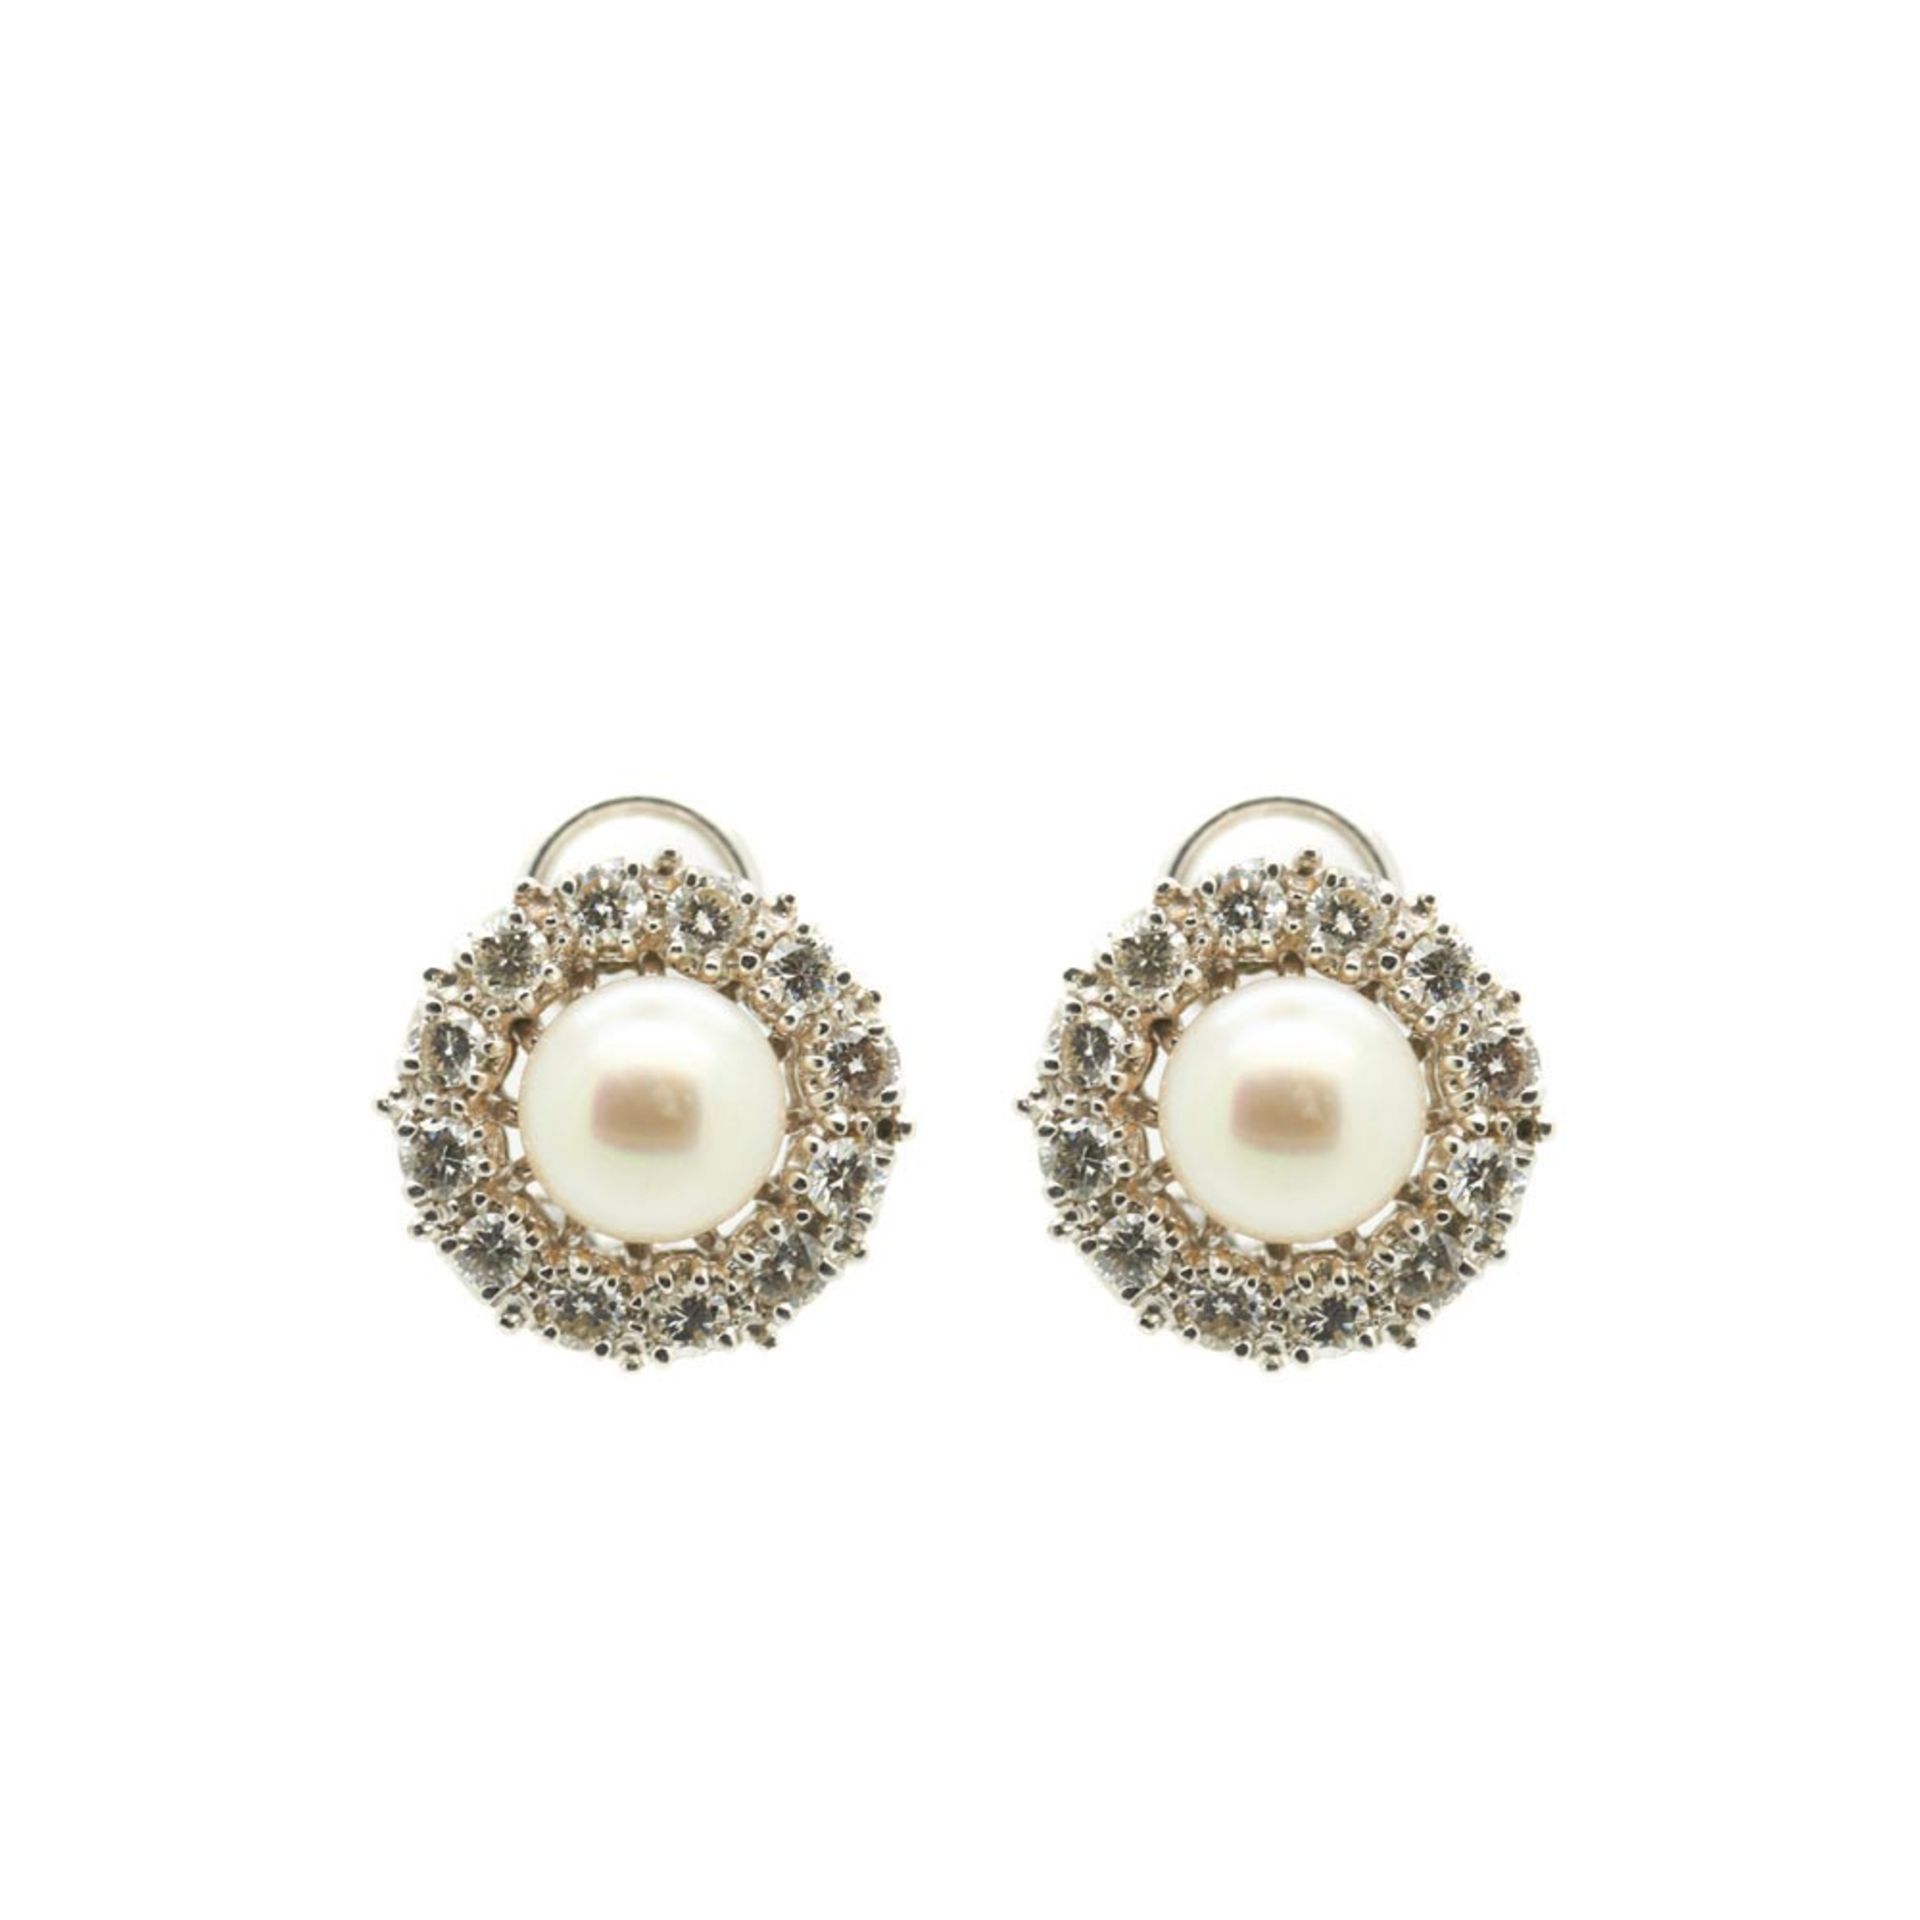 White gold, cultured pearl and diamonds earrings